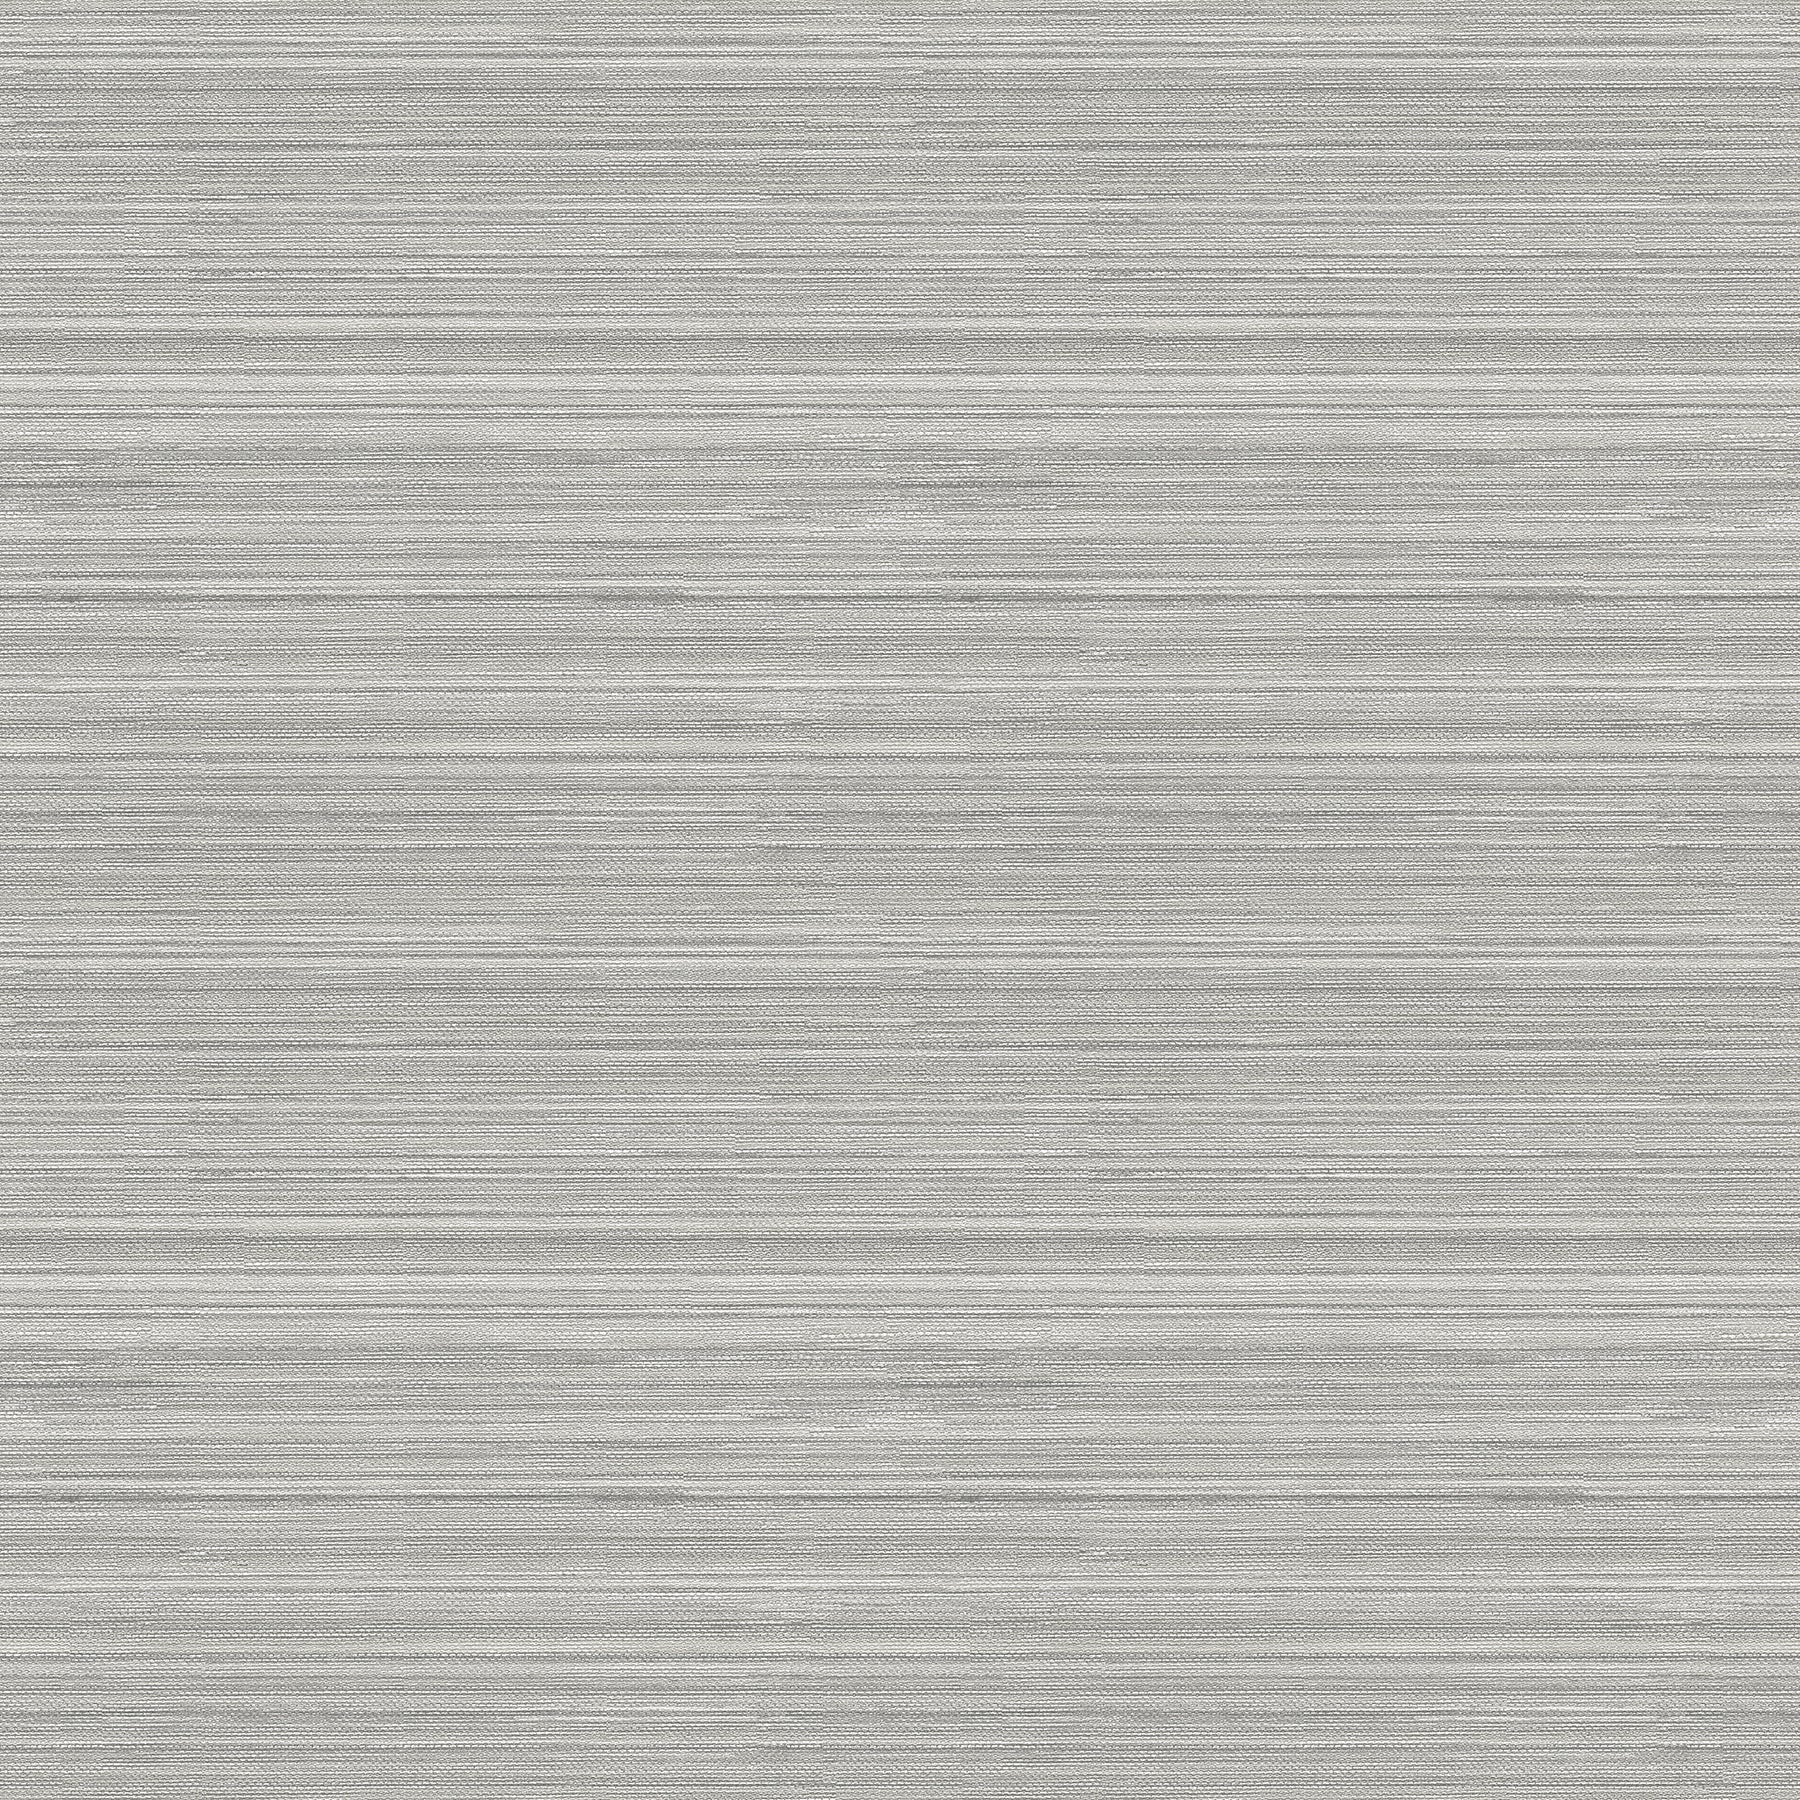 Looking for 2971-86348 Dimensions Skyler Grey Striped Grey A-Street Prints Wallpaper